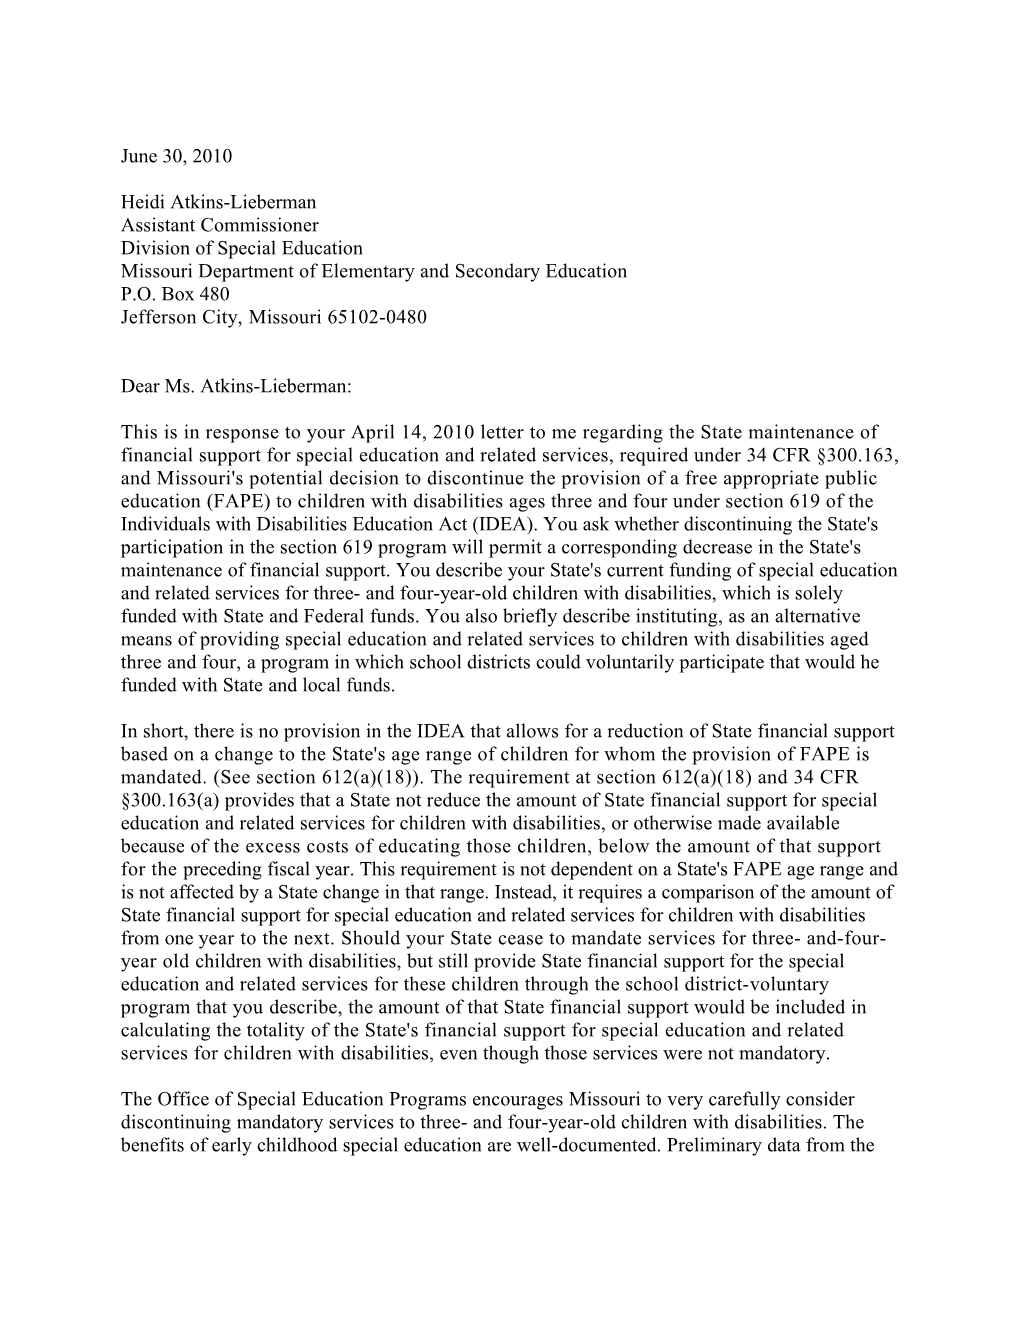 Atkins-Lieberman Letter Dated 06/30/10 Re: Maintenance of State Financial Support (MS Word)